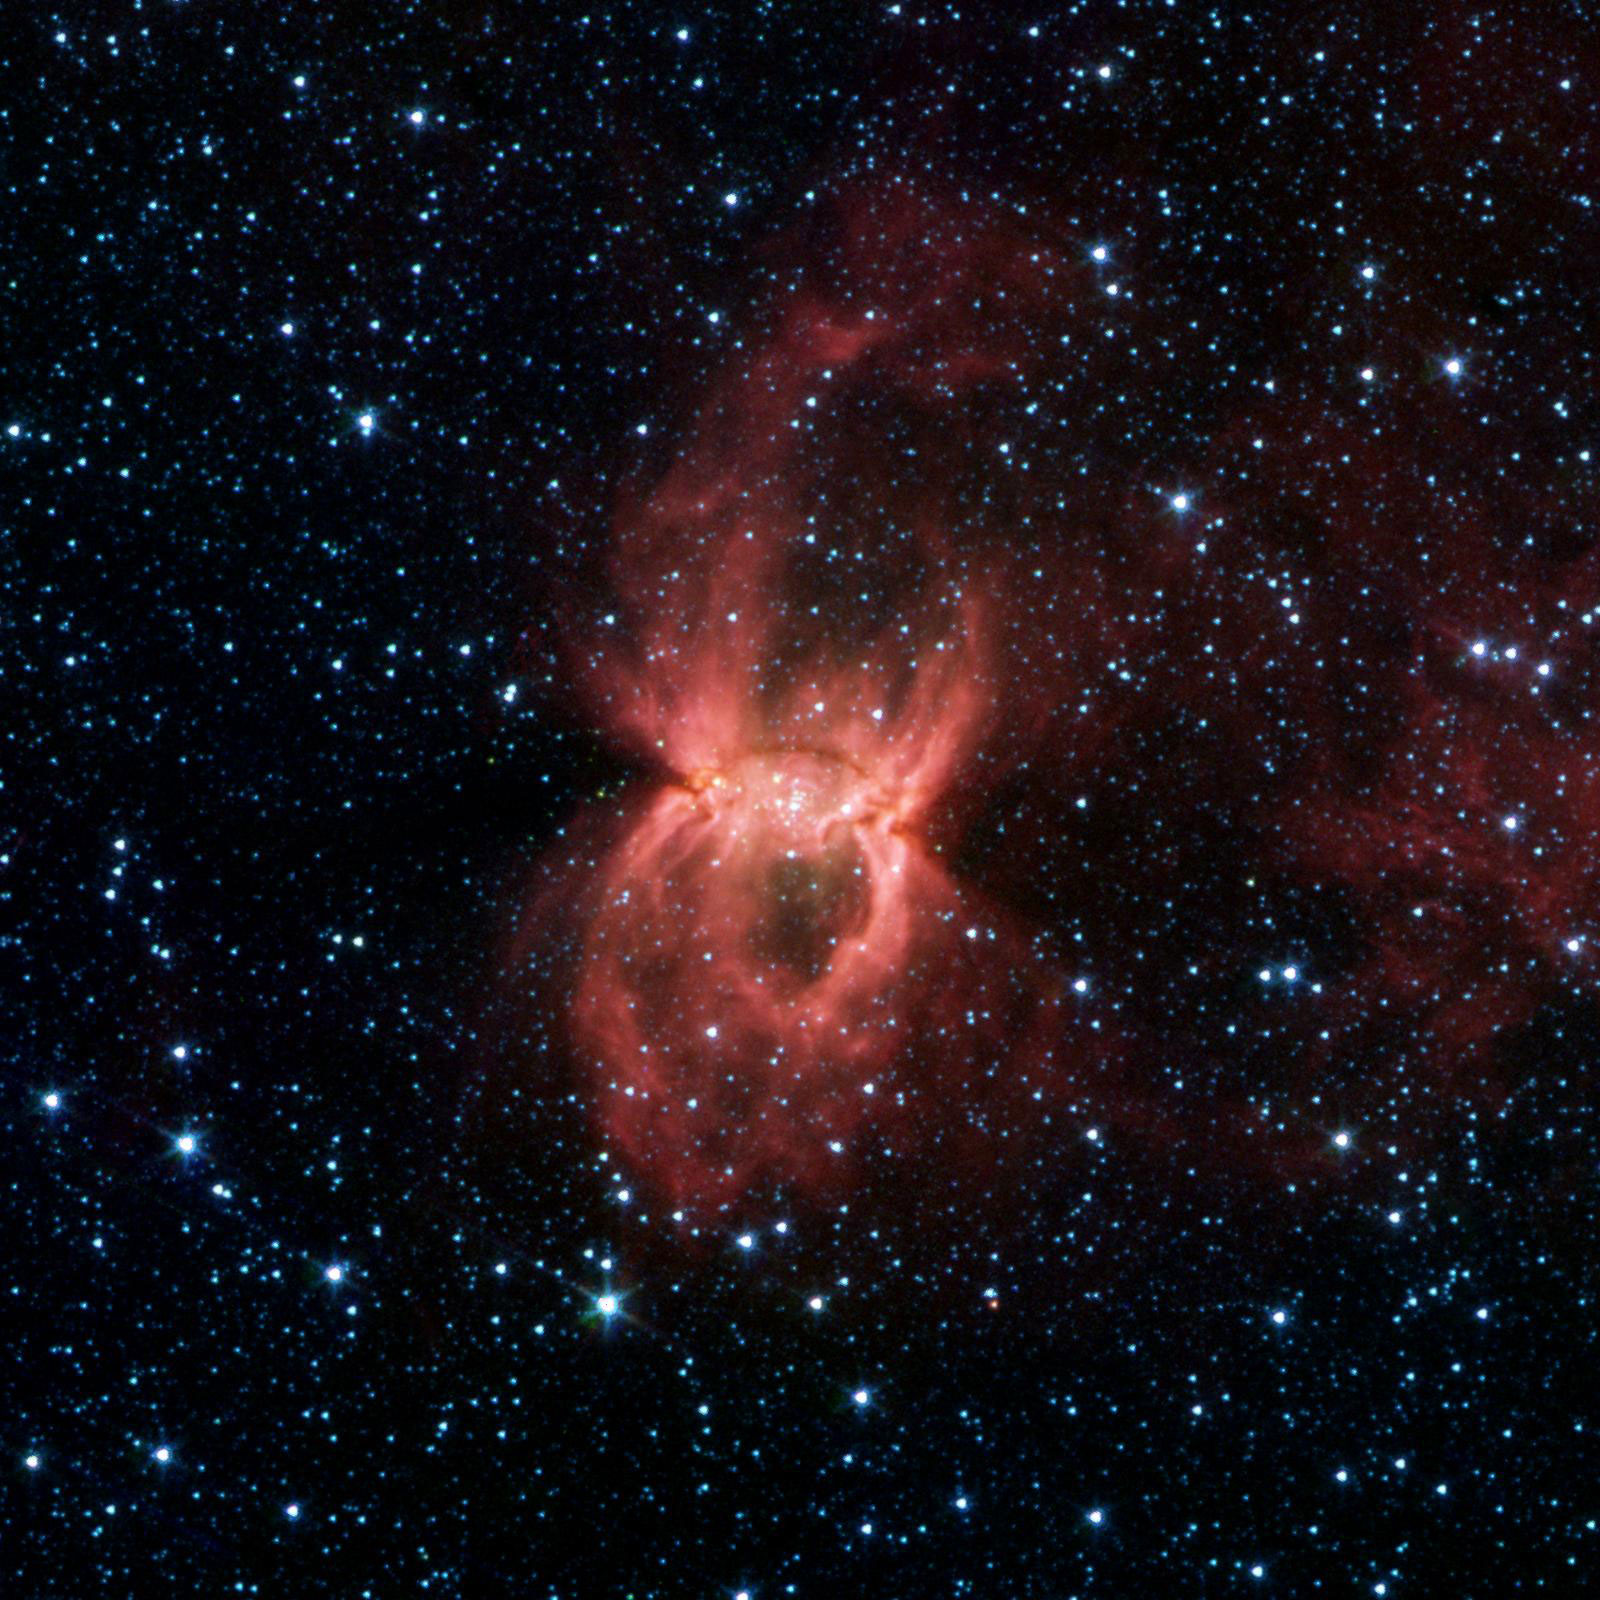 The Black Widow Nebula Astronomers suspect that a large cloud of gas and dust condensed to create multiple clusters of massive star formations in the Black Widow nebula. The combined winds from these groups of large stars likely blew out bubbles into the direction of least resistance, forming a double bubble which appear as the spider's legs.